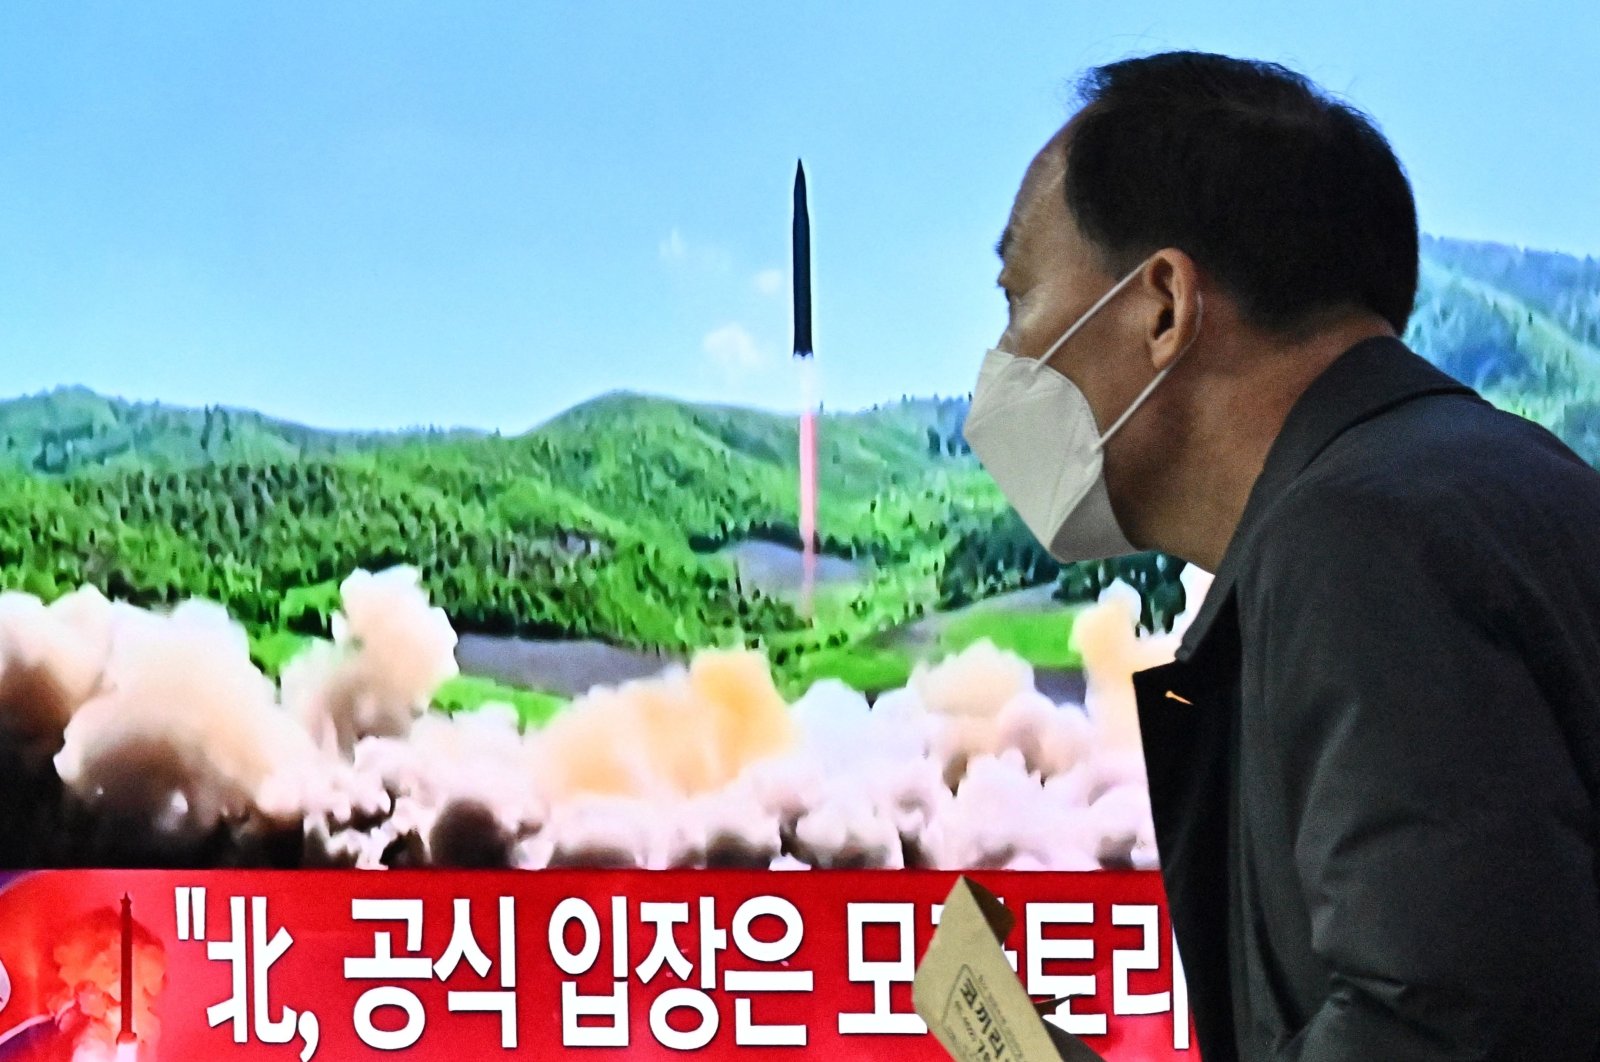 A man walks past a television report showing a news broadcast with file footage of a North Korean missile test, at a railway station in Seoul, South Korea, March 24, 2022. (AFP Photo)